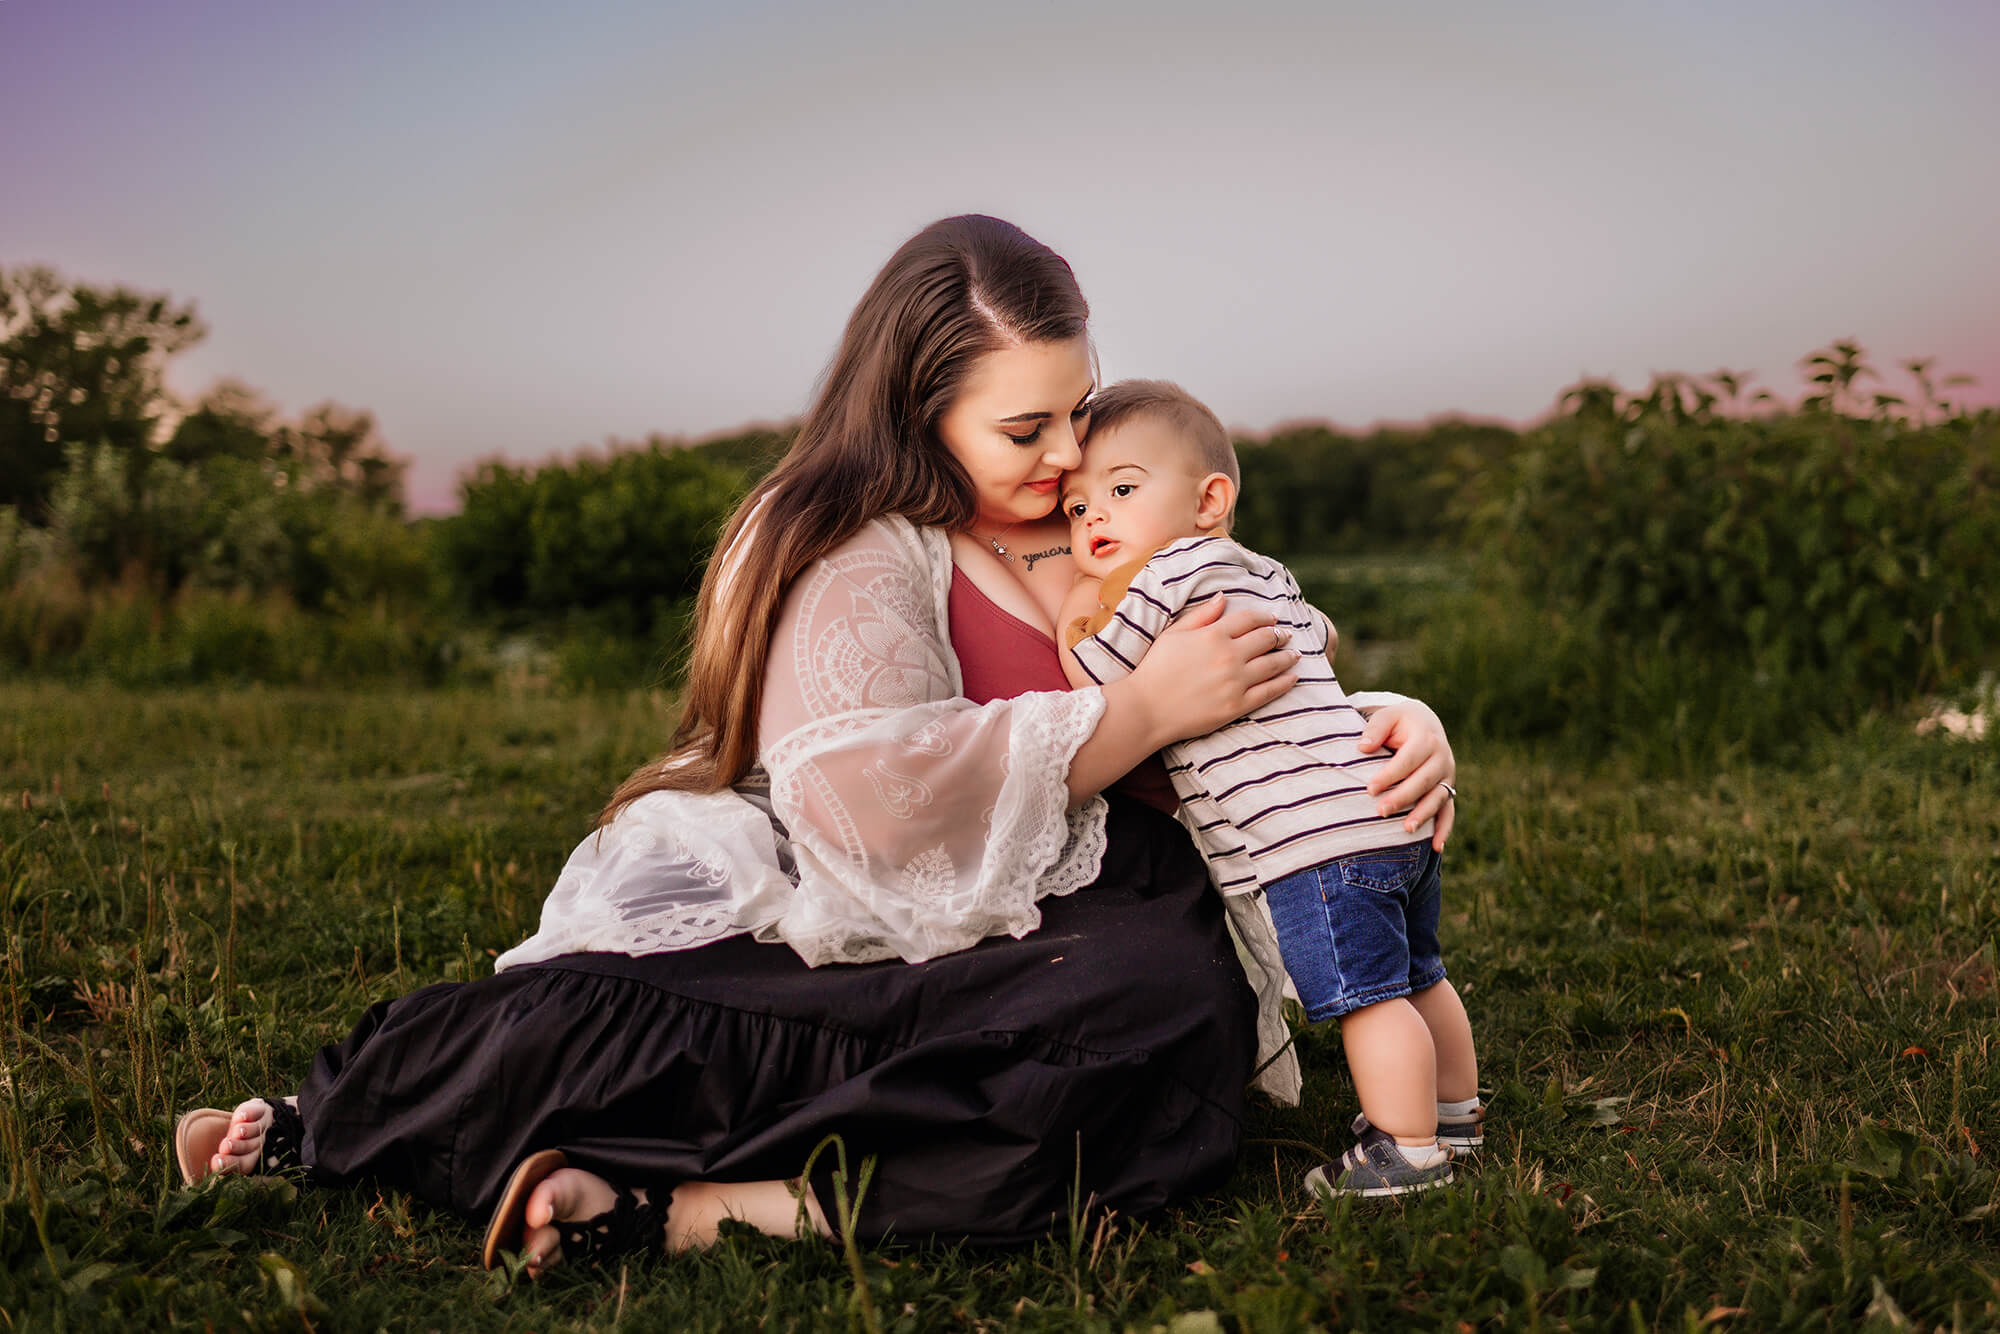 Springfield MO photographer captures son hugging mom while sitting in grass